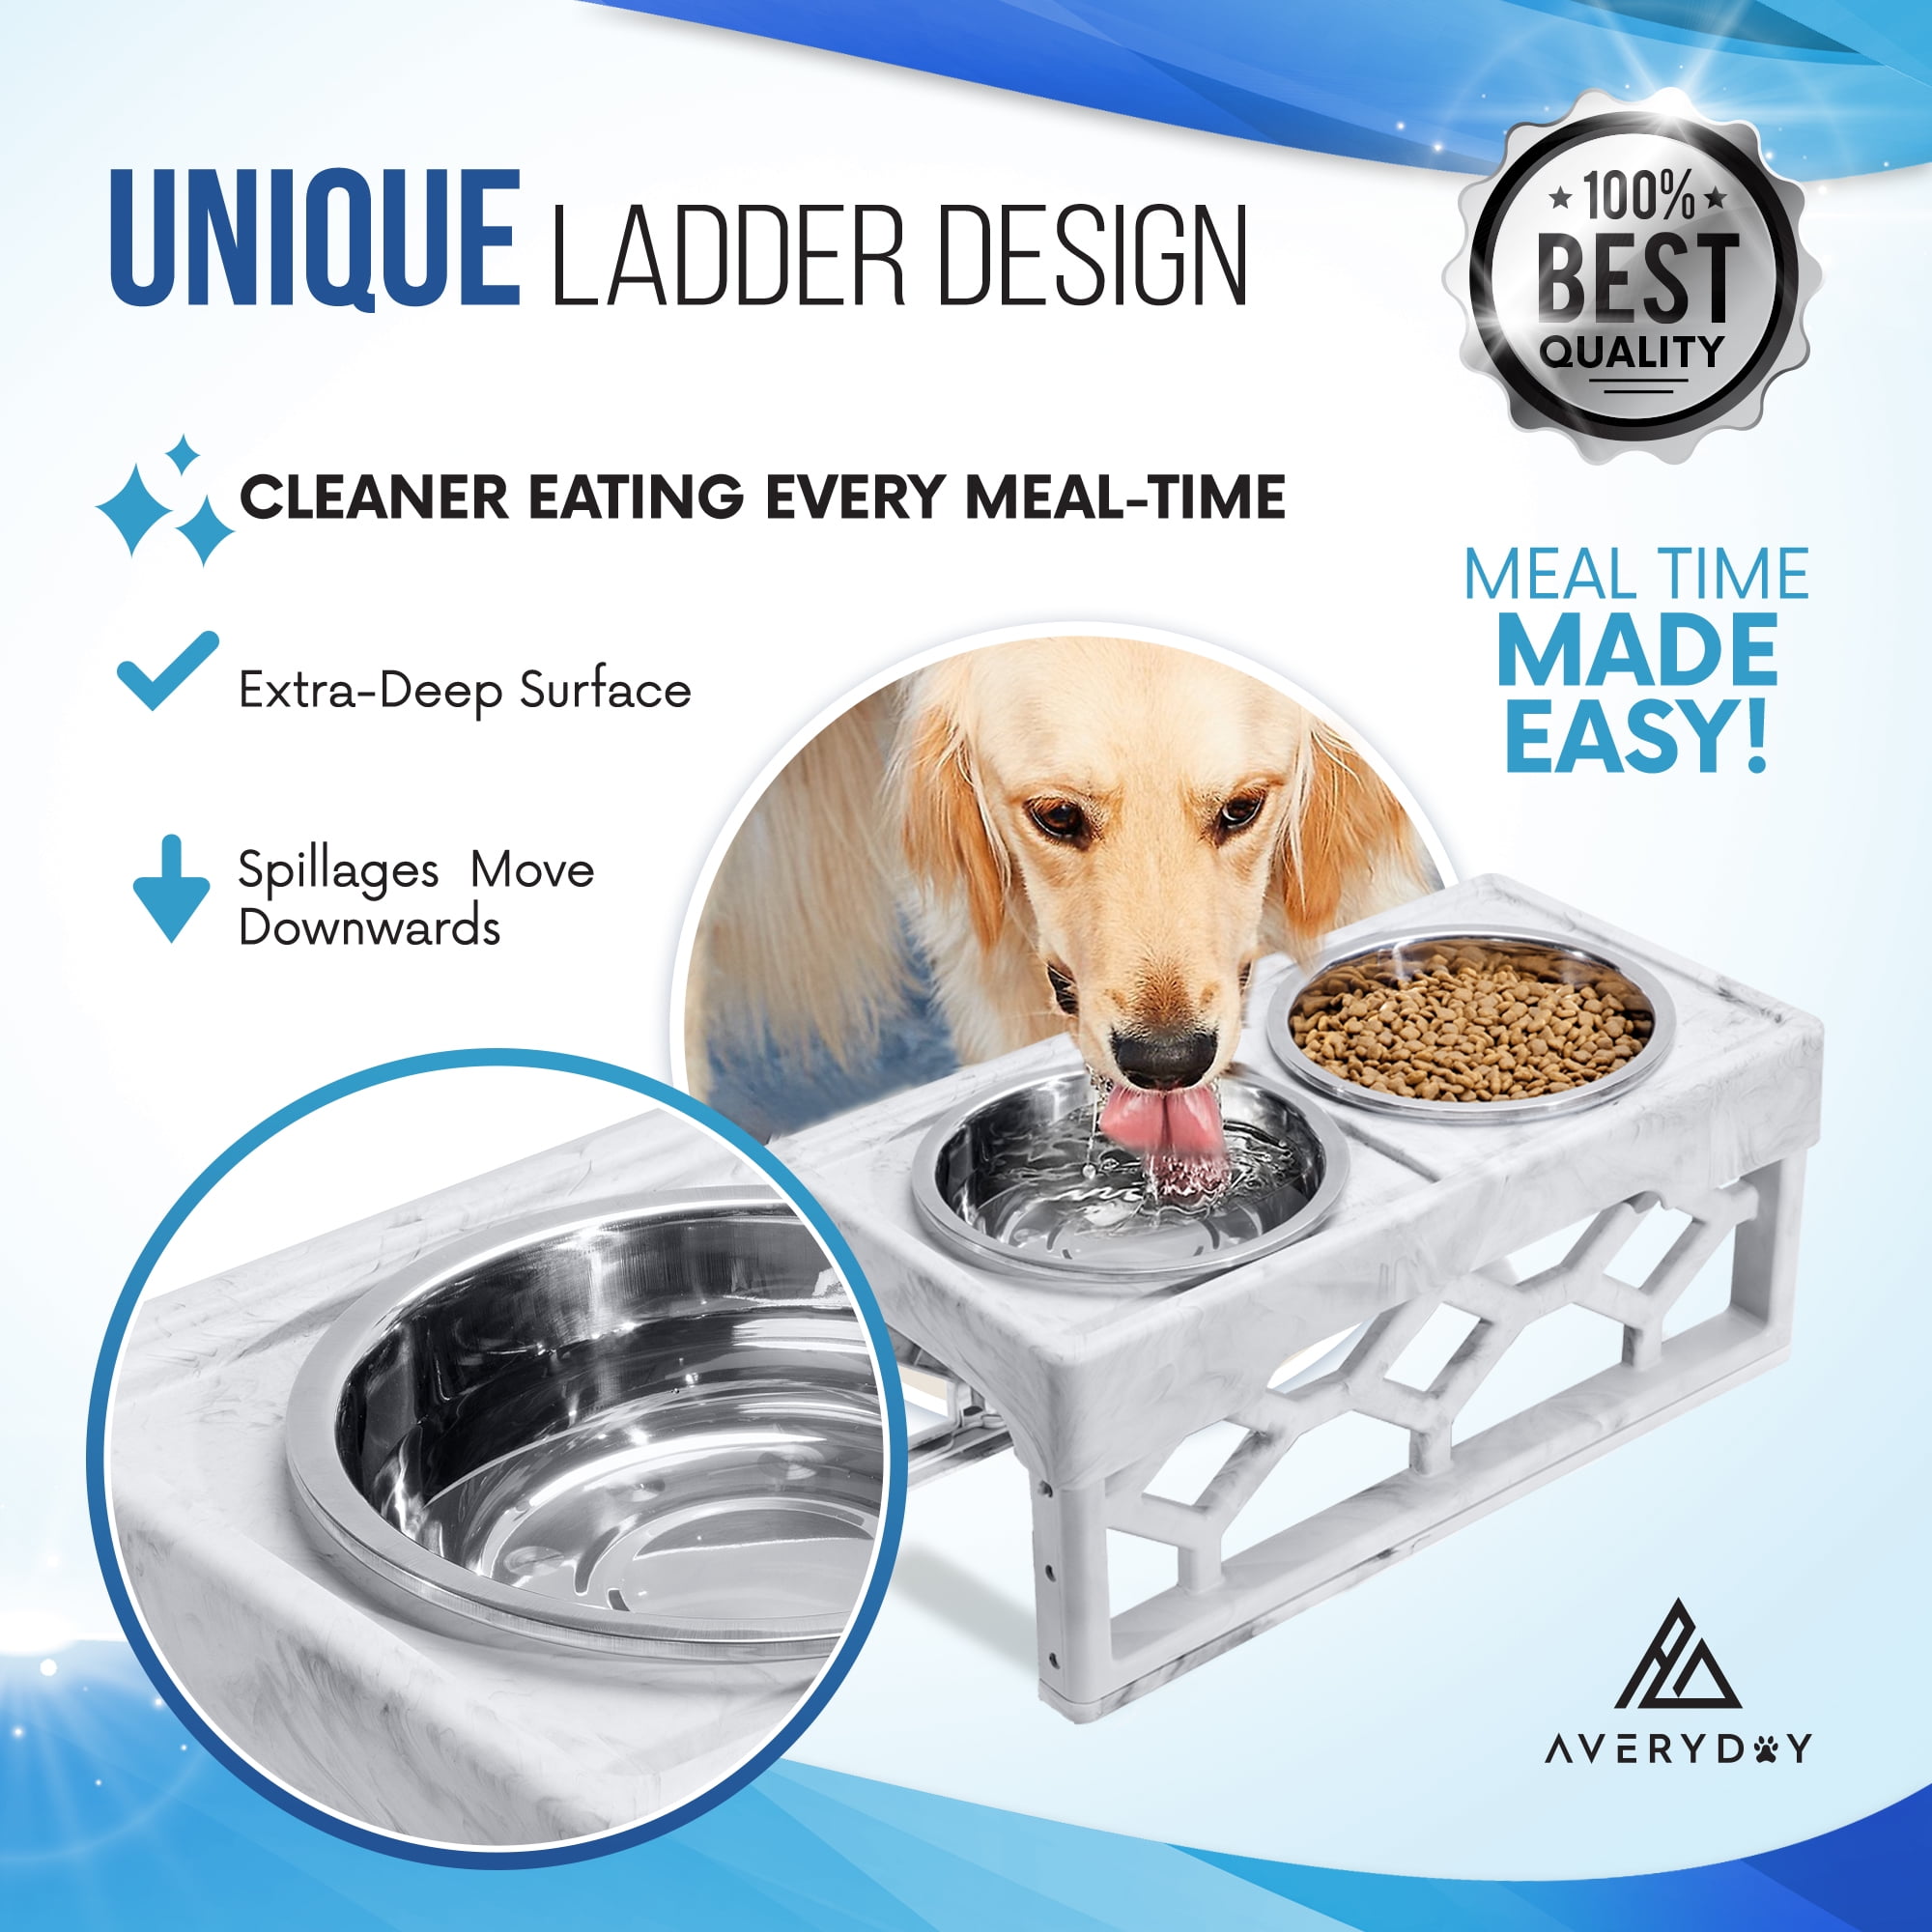 9 Best Elevated Dog Bowls for Easier Meal Times